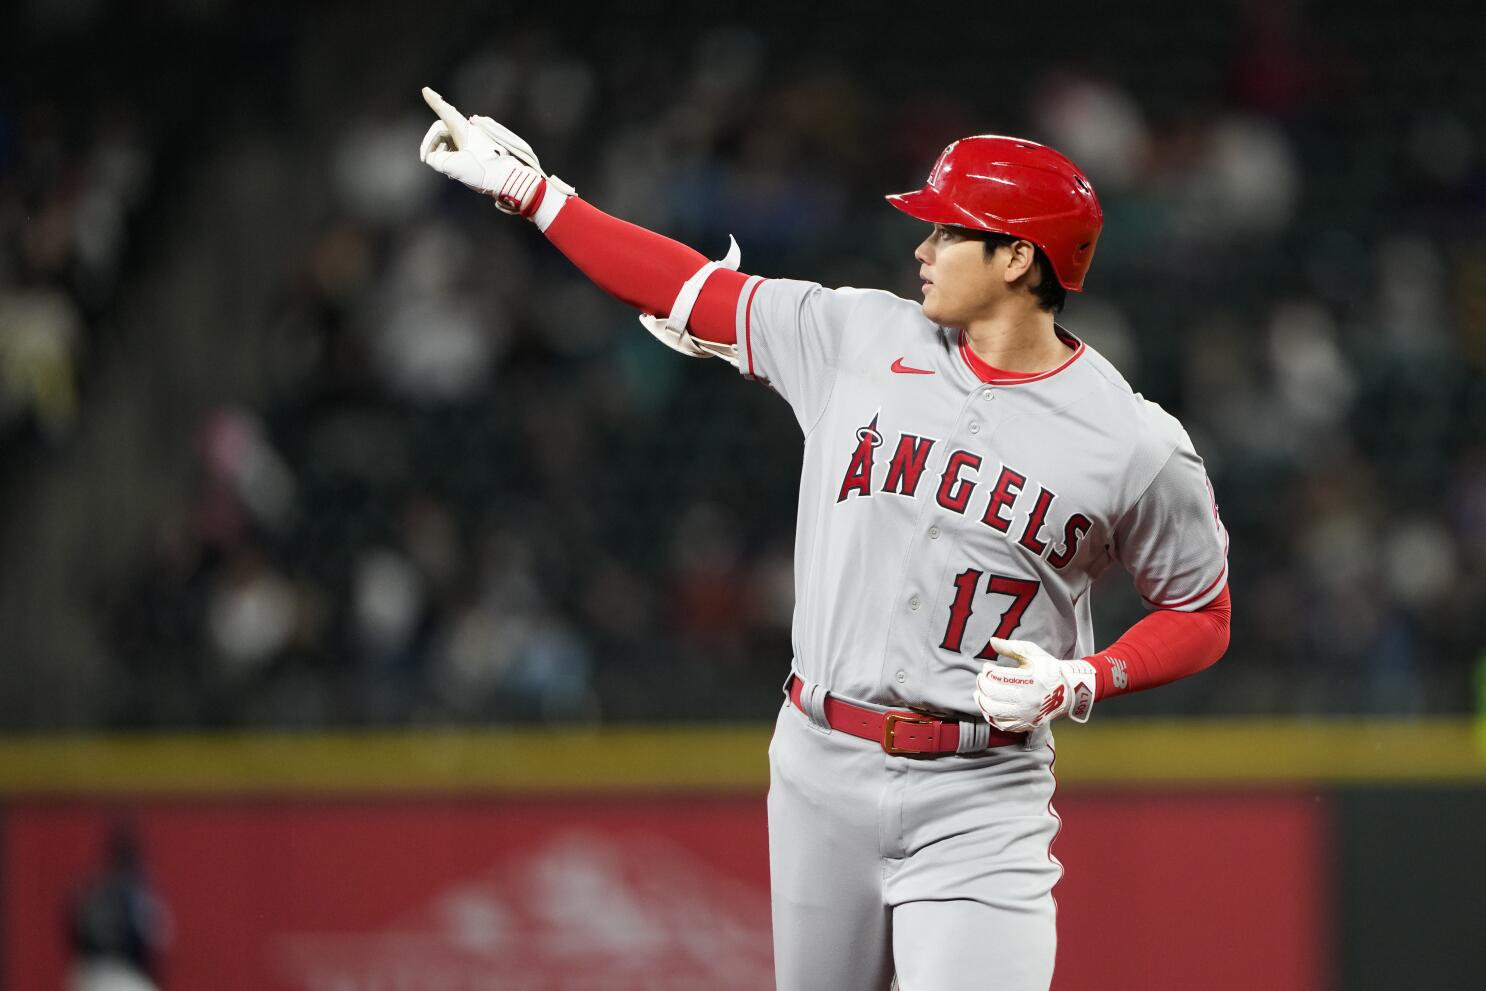 Shohei Ohtani's homer helps lift Angels past Mariners - Los